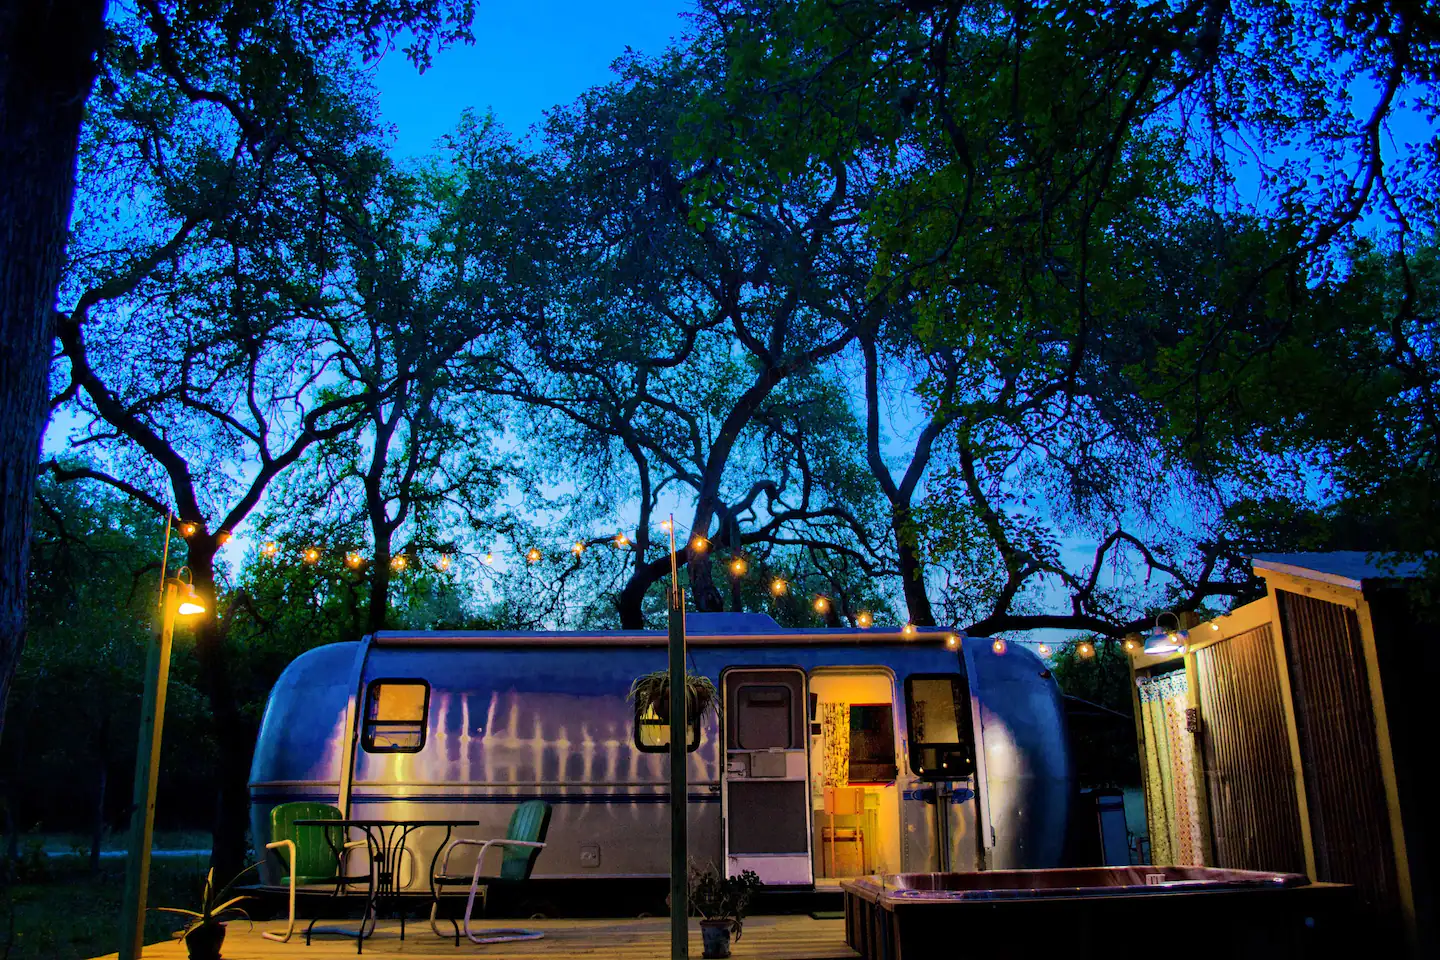 The Airstream campsite offers it all: a charcoal grill, a hot tub, a deck, an outdoor dining table with an umbrella, a shaded tree grove, an outdoor shower, and a fire ring with seats!